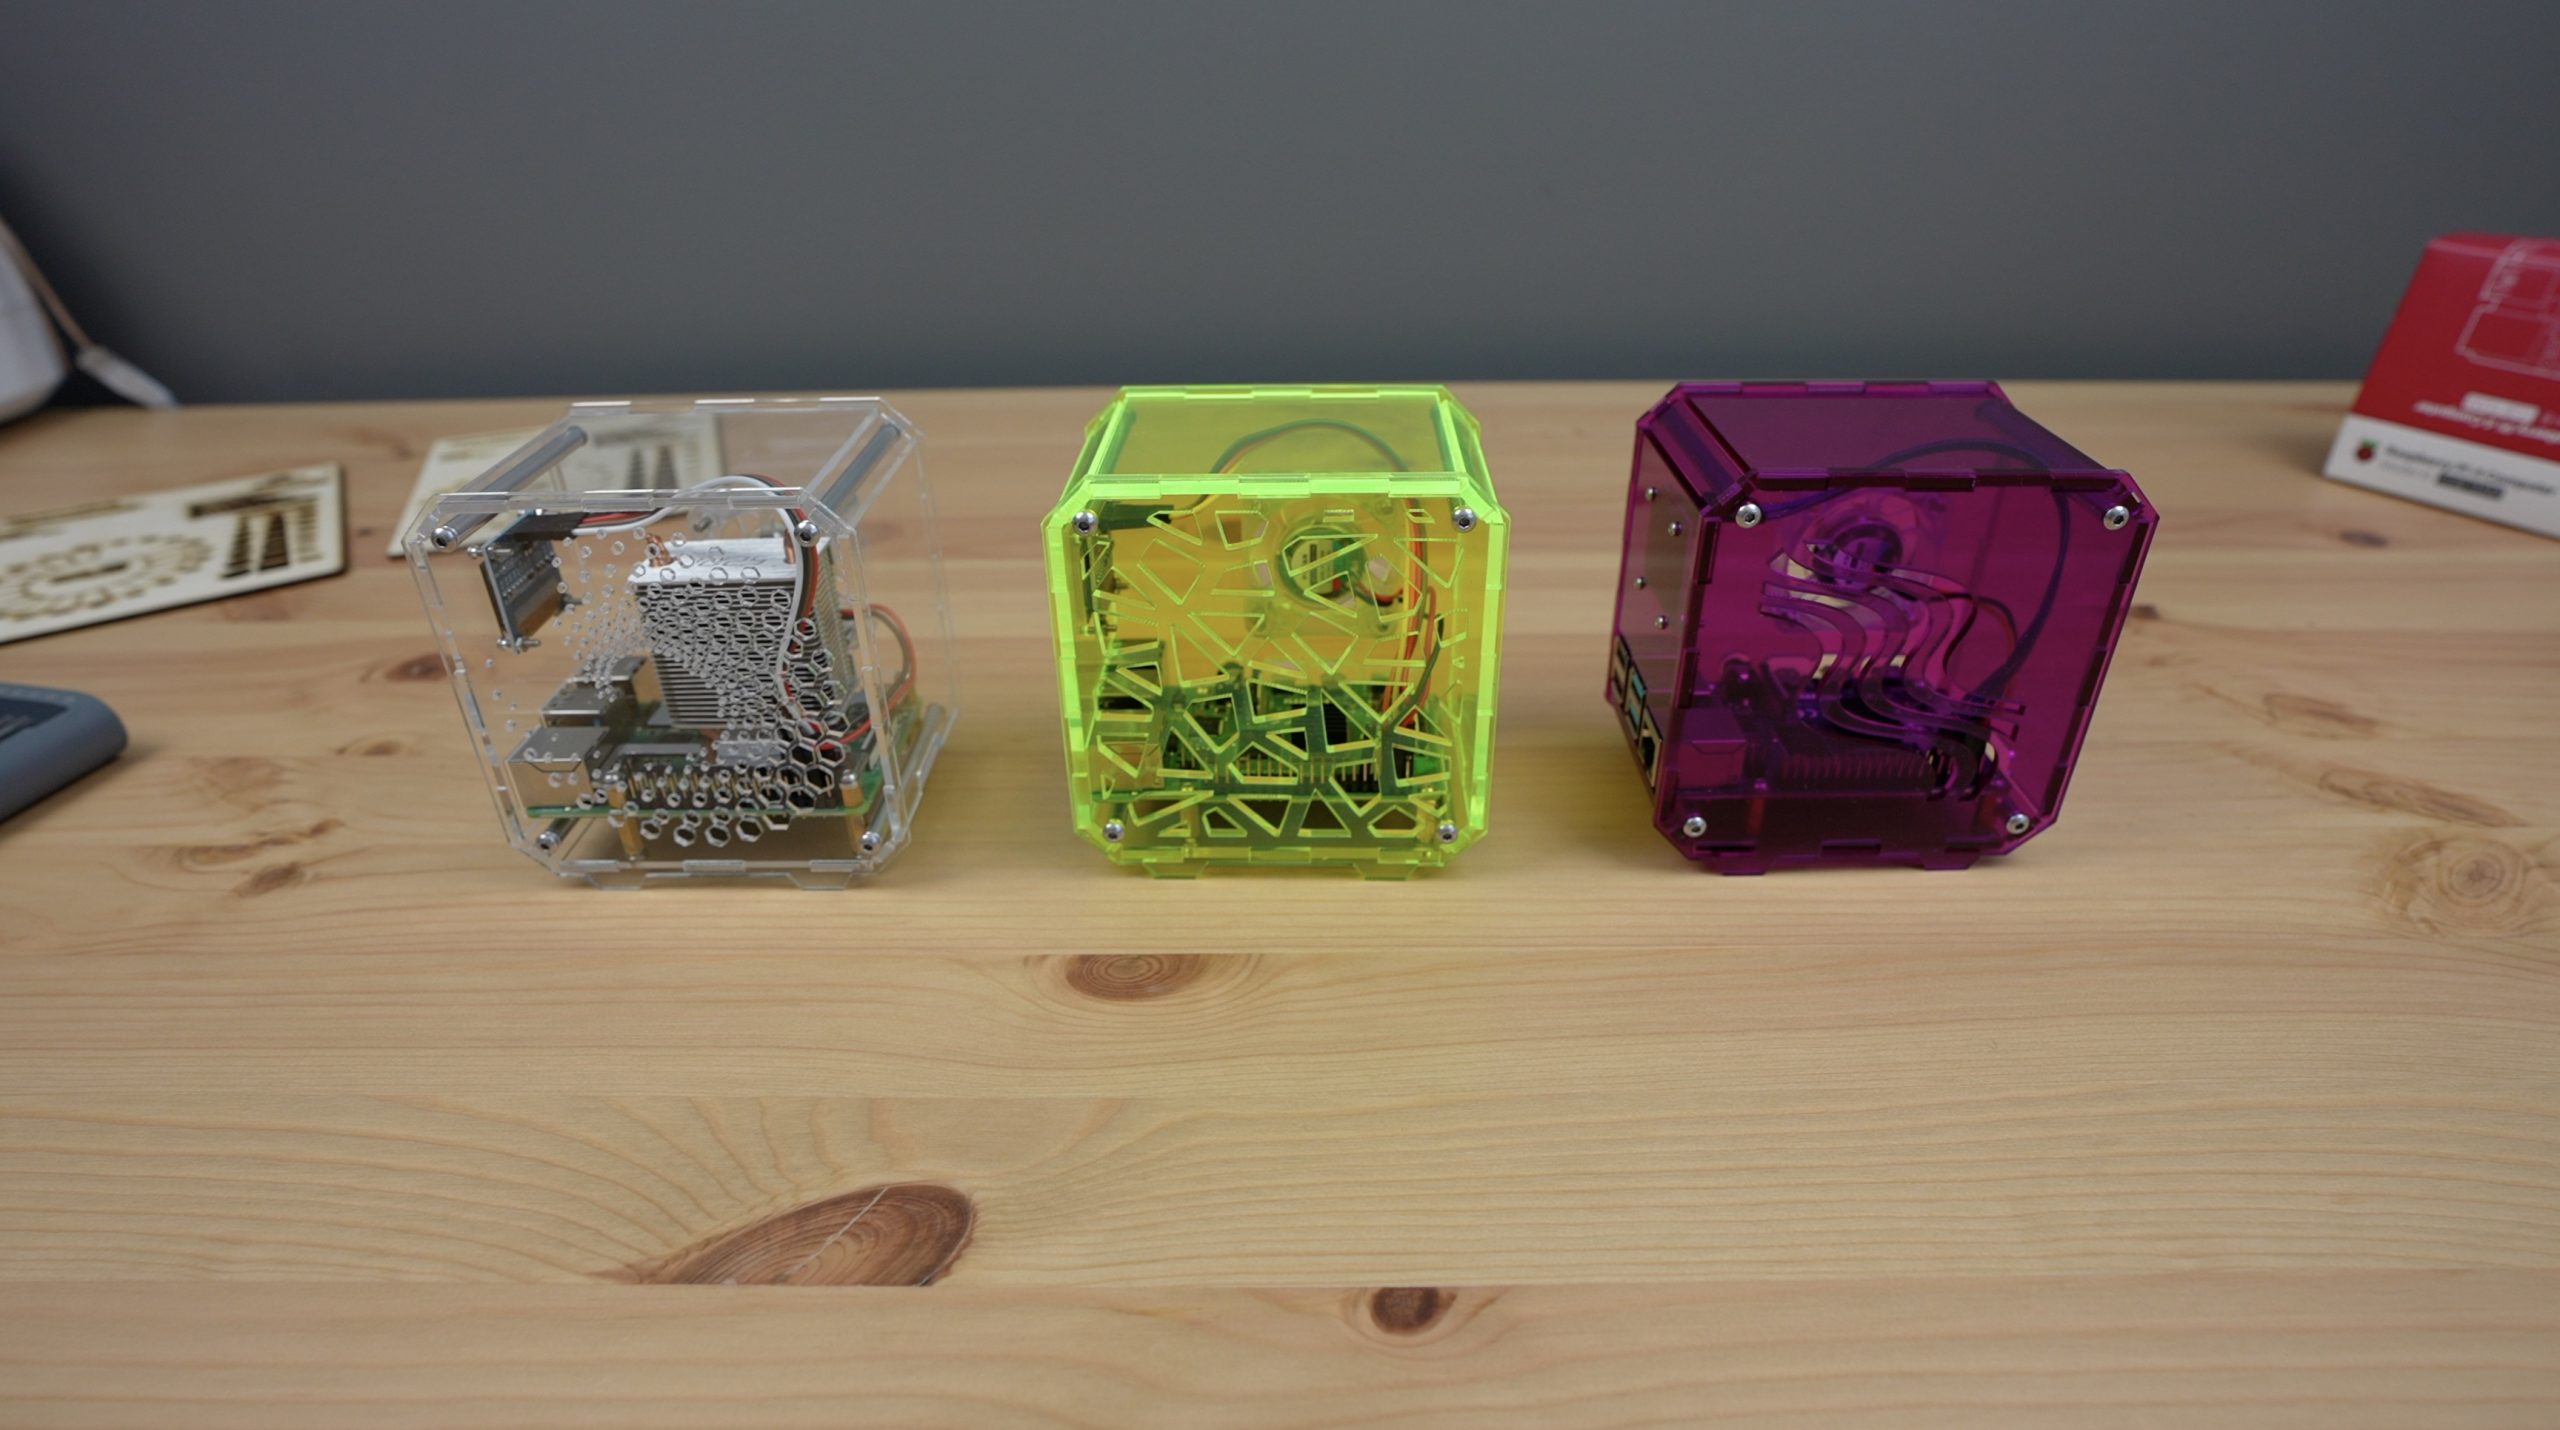 Sides Of Completed Acrylic Raspberry Pi Cases